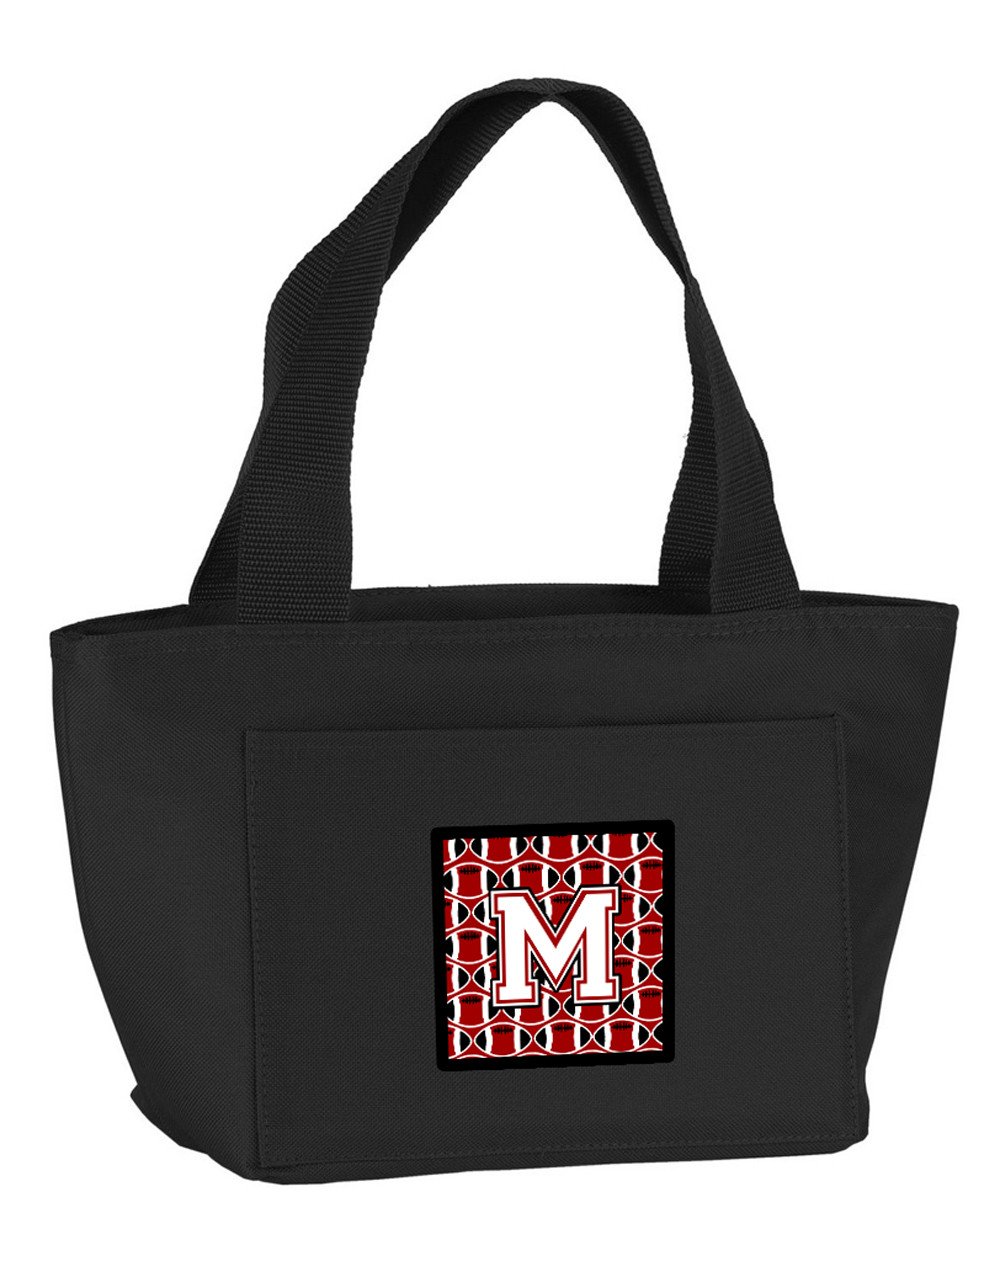 Letter M Football Cardinal and White Lunch Bag CJ1082-MBK-8808 by Caroline's Treasures